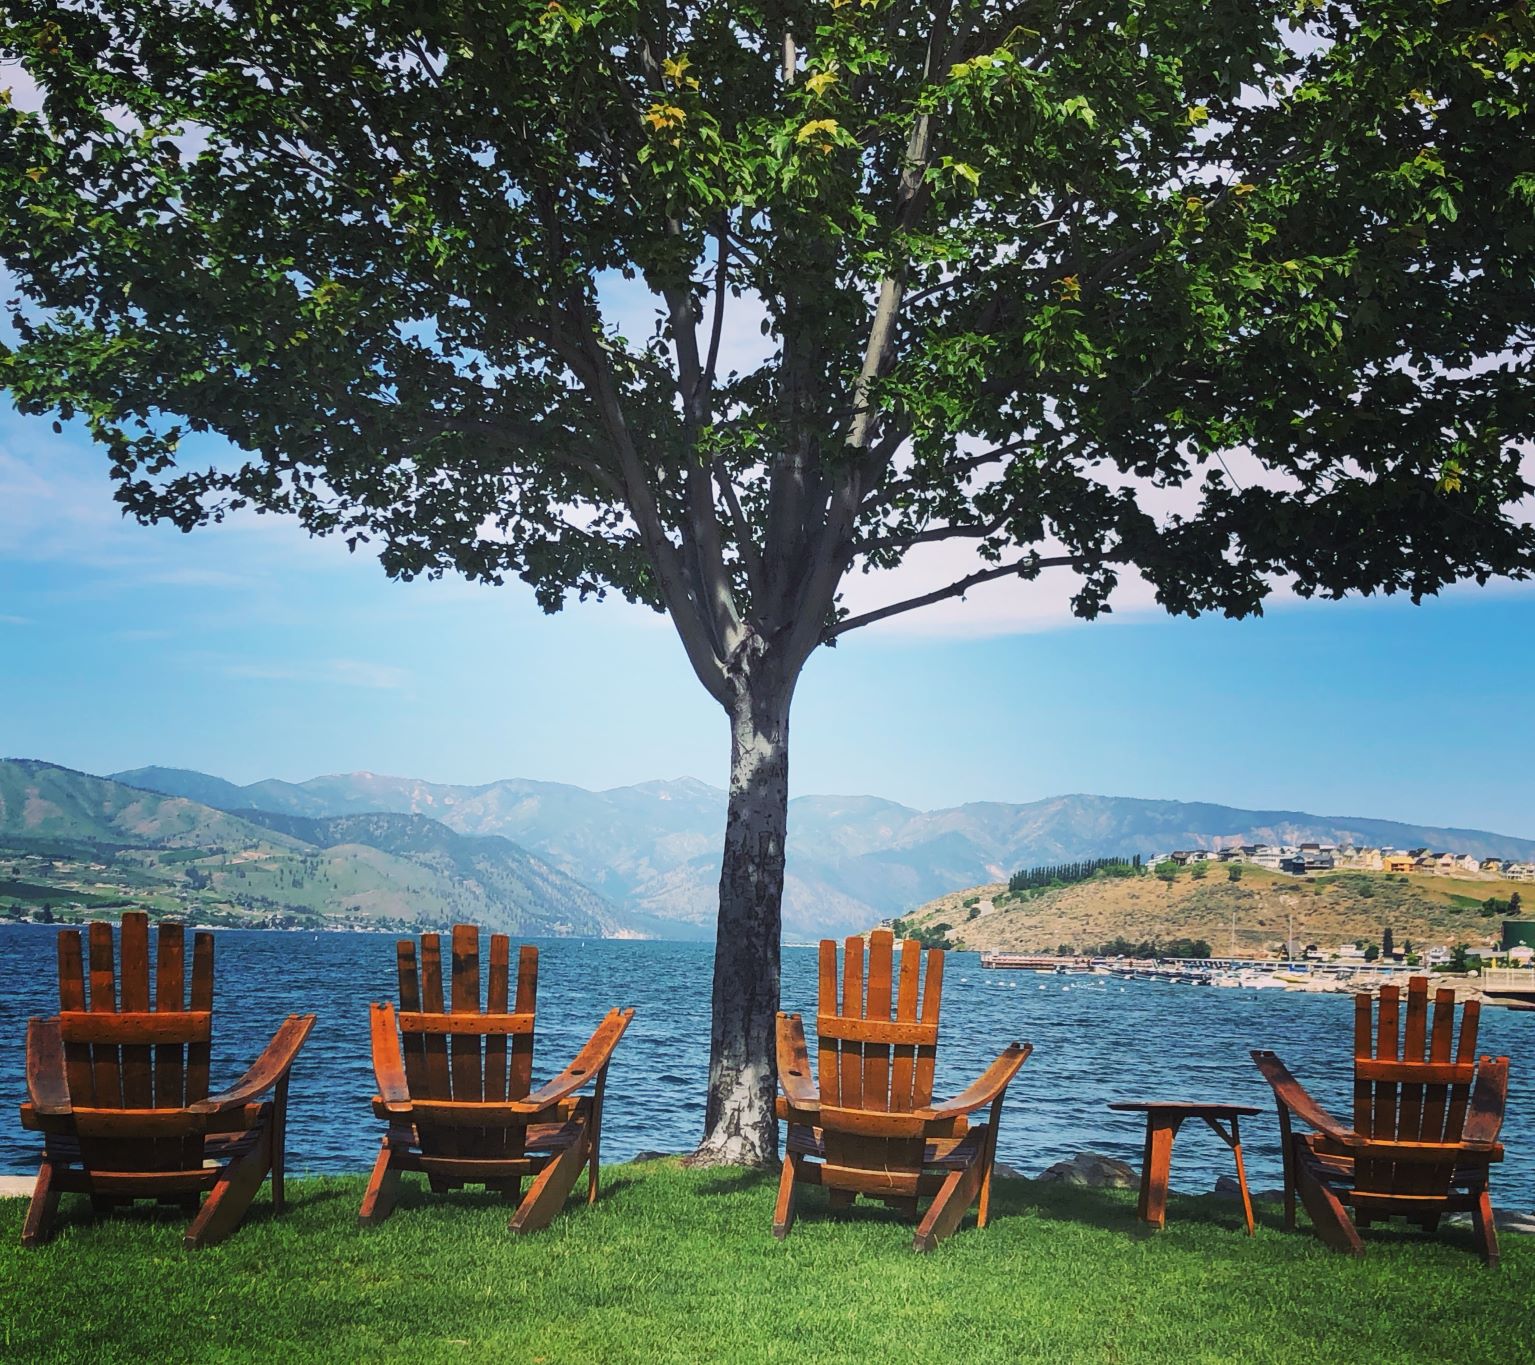 Four Adirondack chairs facing out towards the blue water of Lake Chelan.